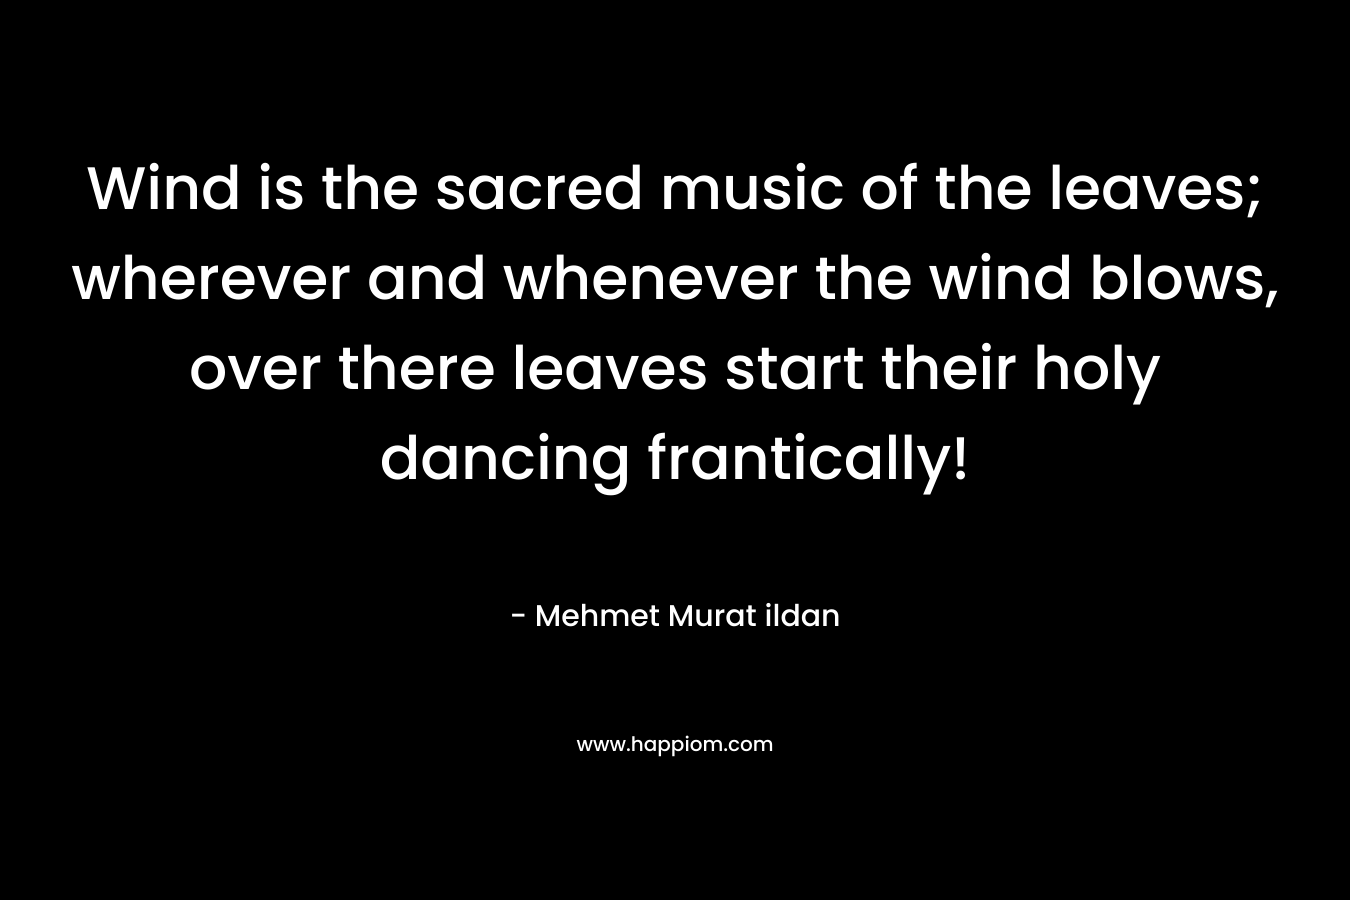 Wind is the sacred music of the leaves; wherever and whenever the wind blows, over there leaves start their holy dancing frantically!